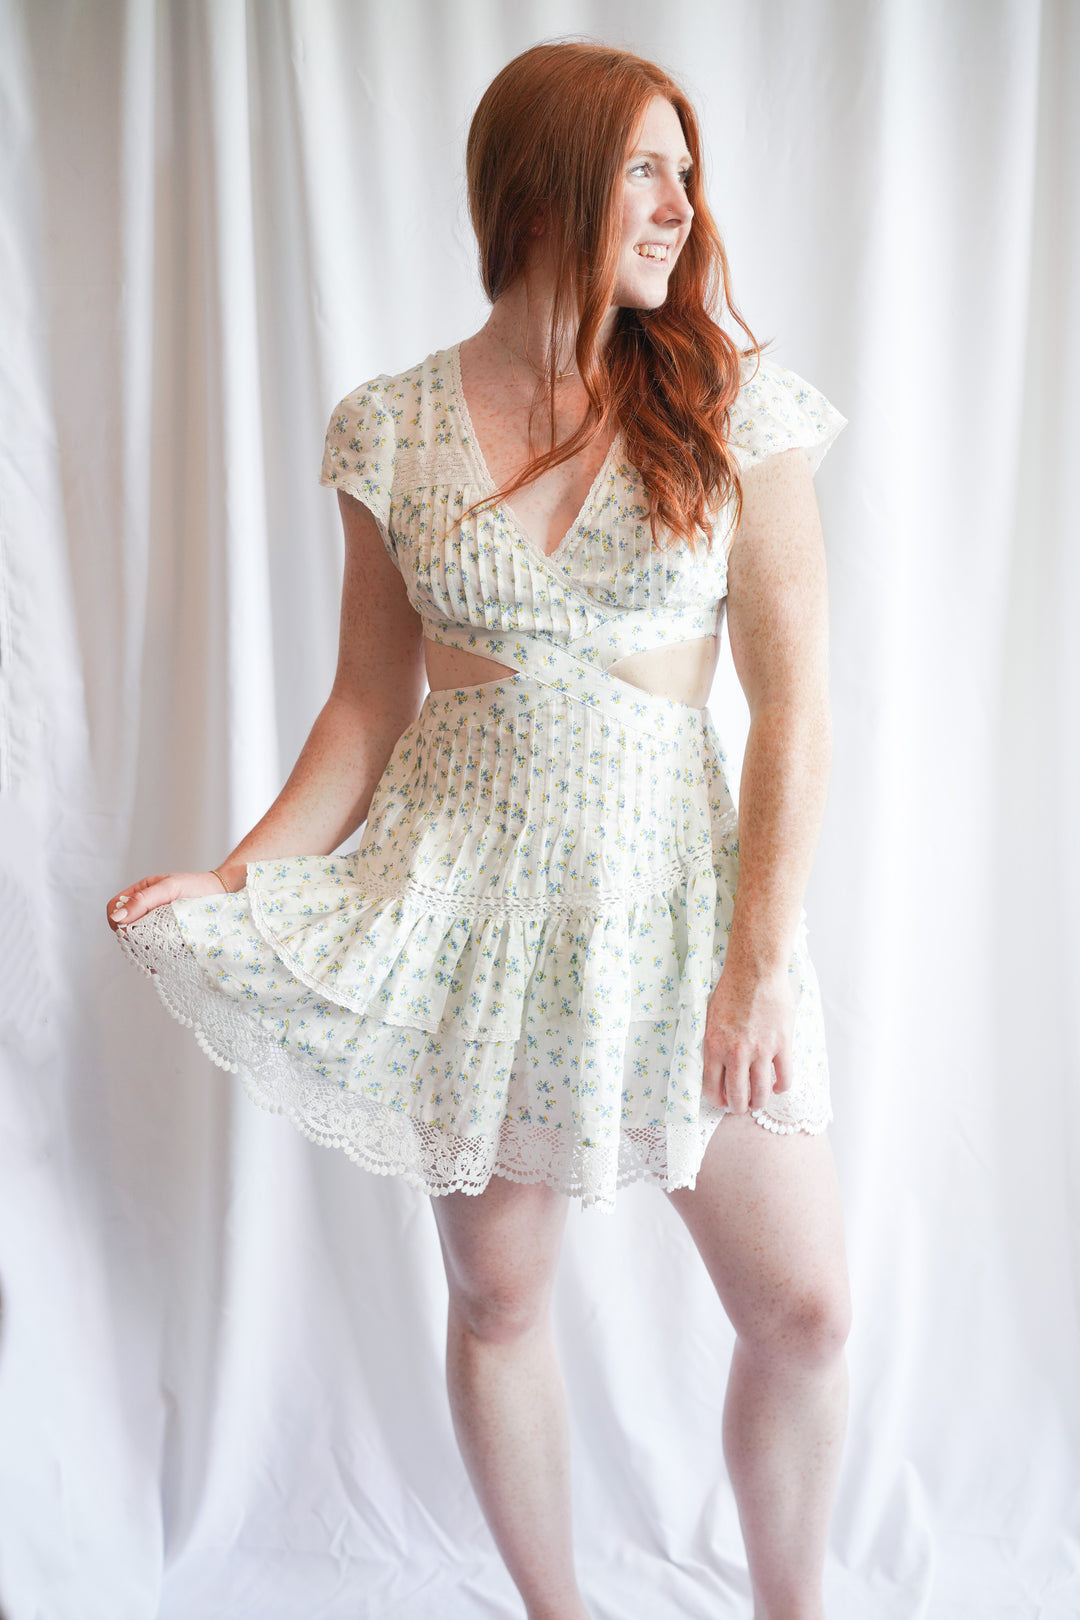 mini dress with lace crochet trim and floral print, flutter sleeves, and a waist side cut out